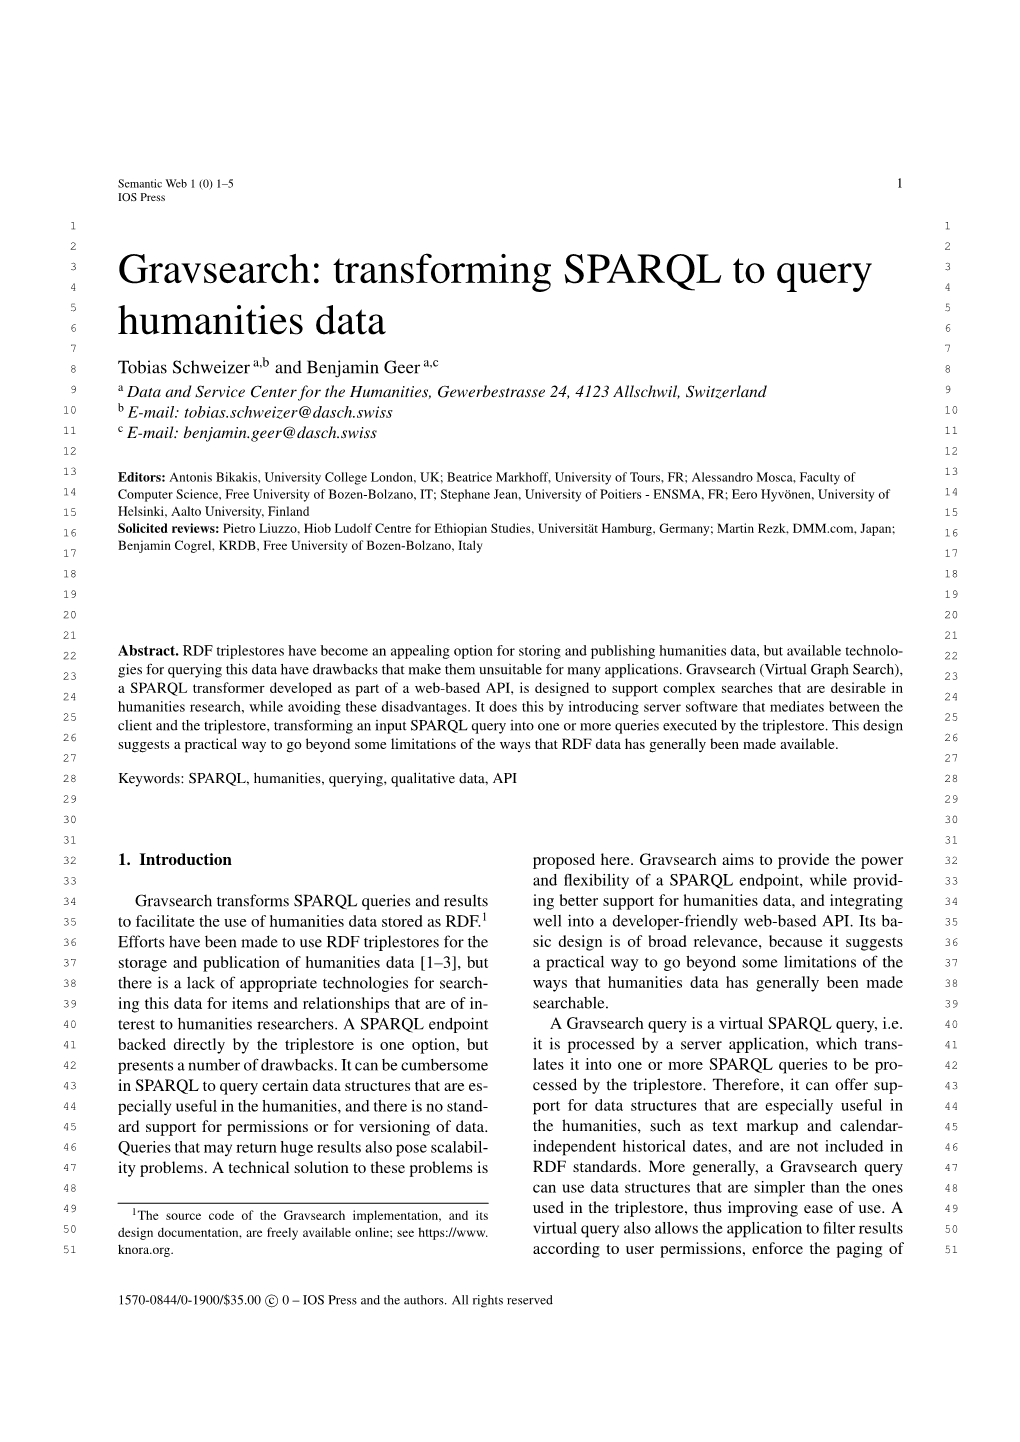 Transforming SPARQL to Query Humanities Data